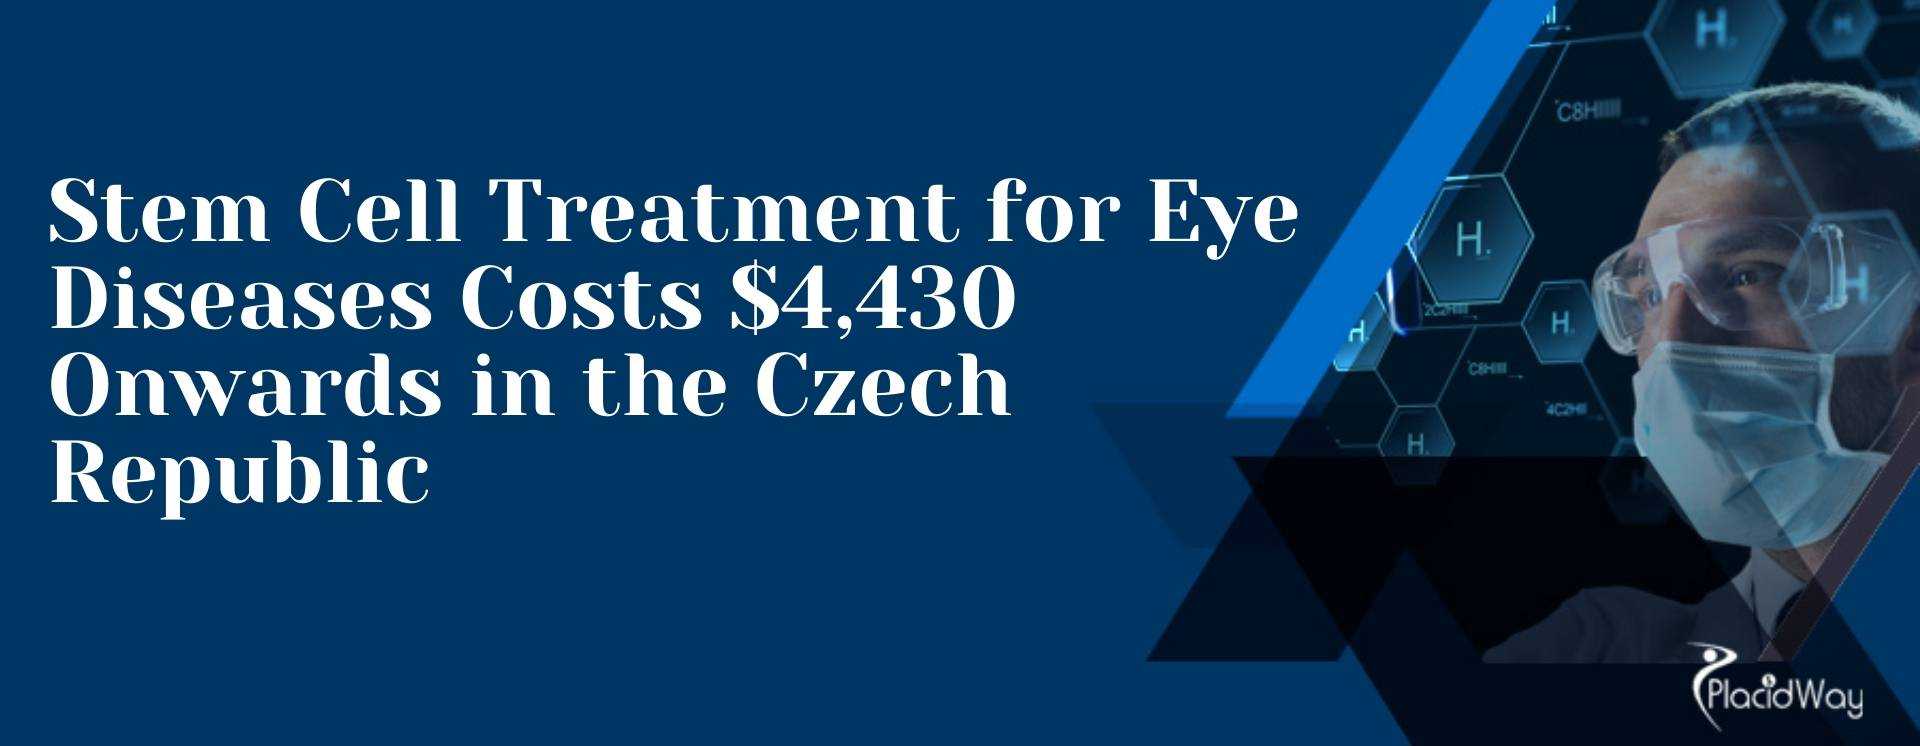 Stem Cell Treatment for Eye Diseases in the Czech Republic